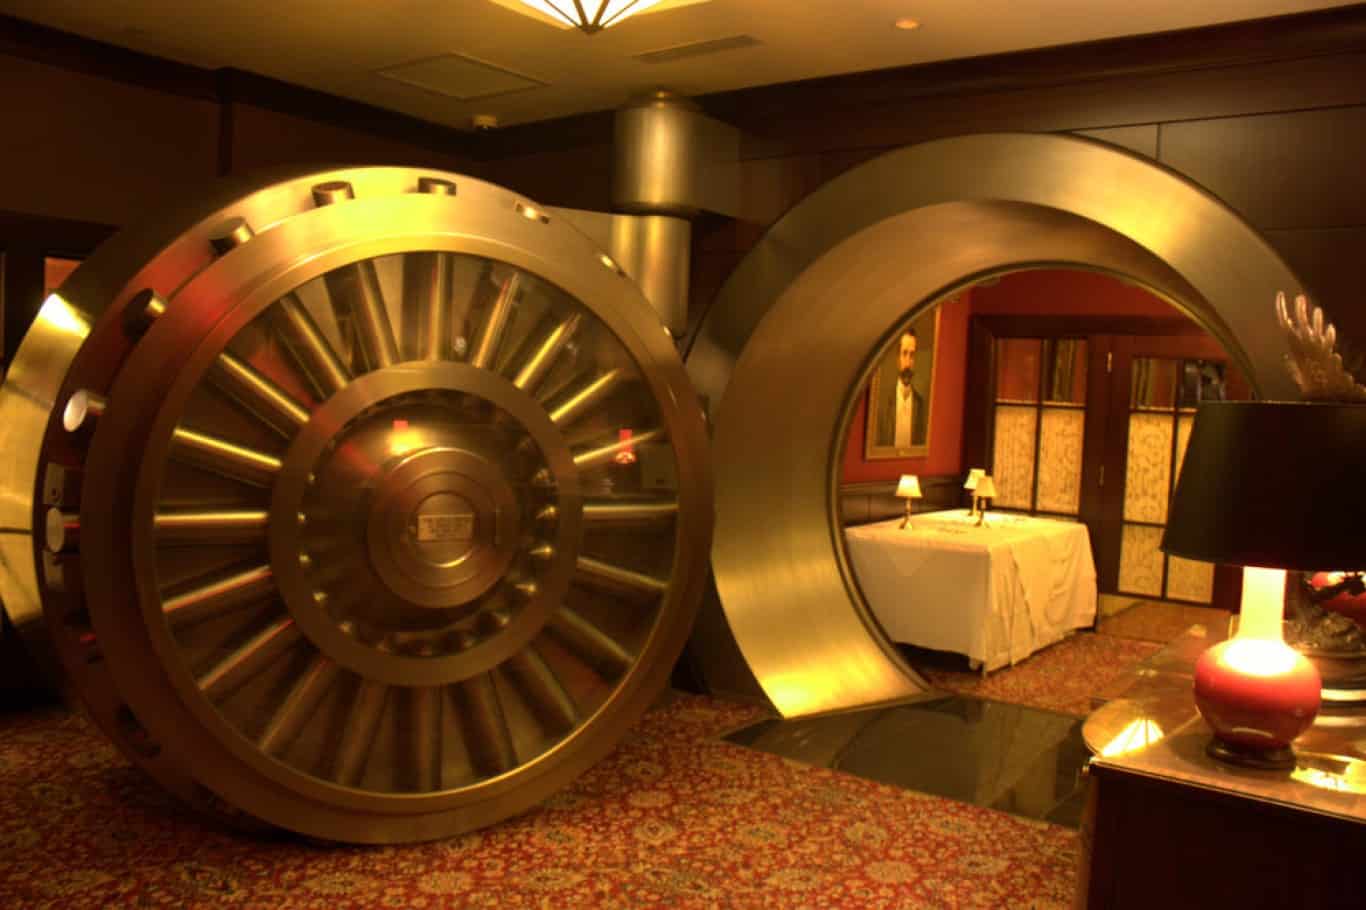 capital grille vault by Krista